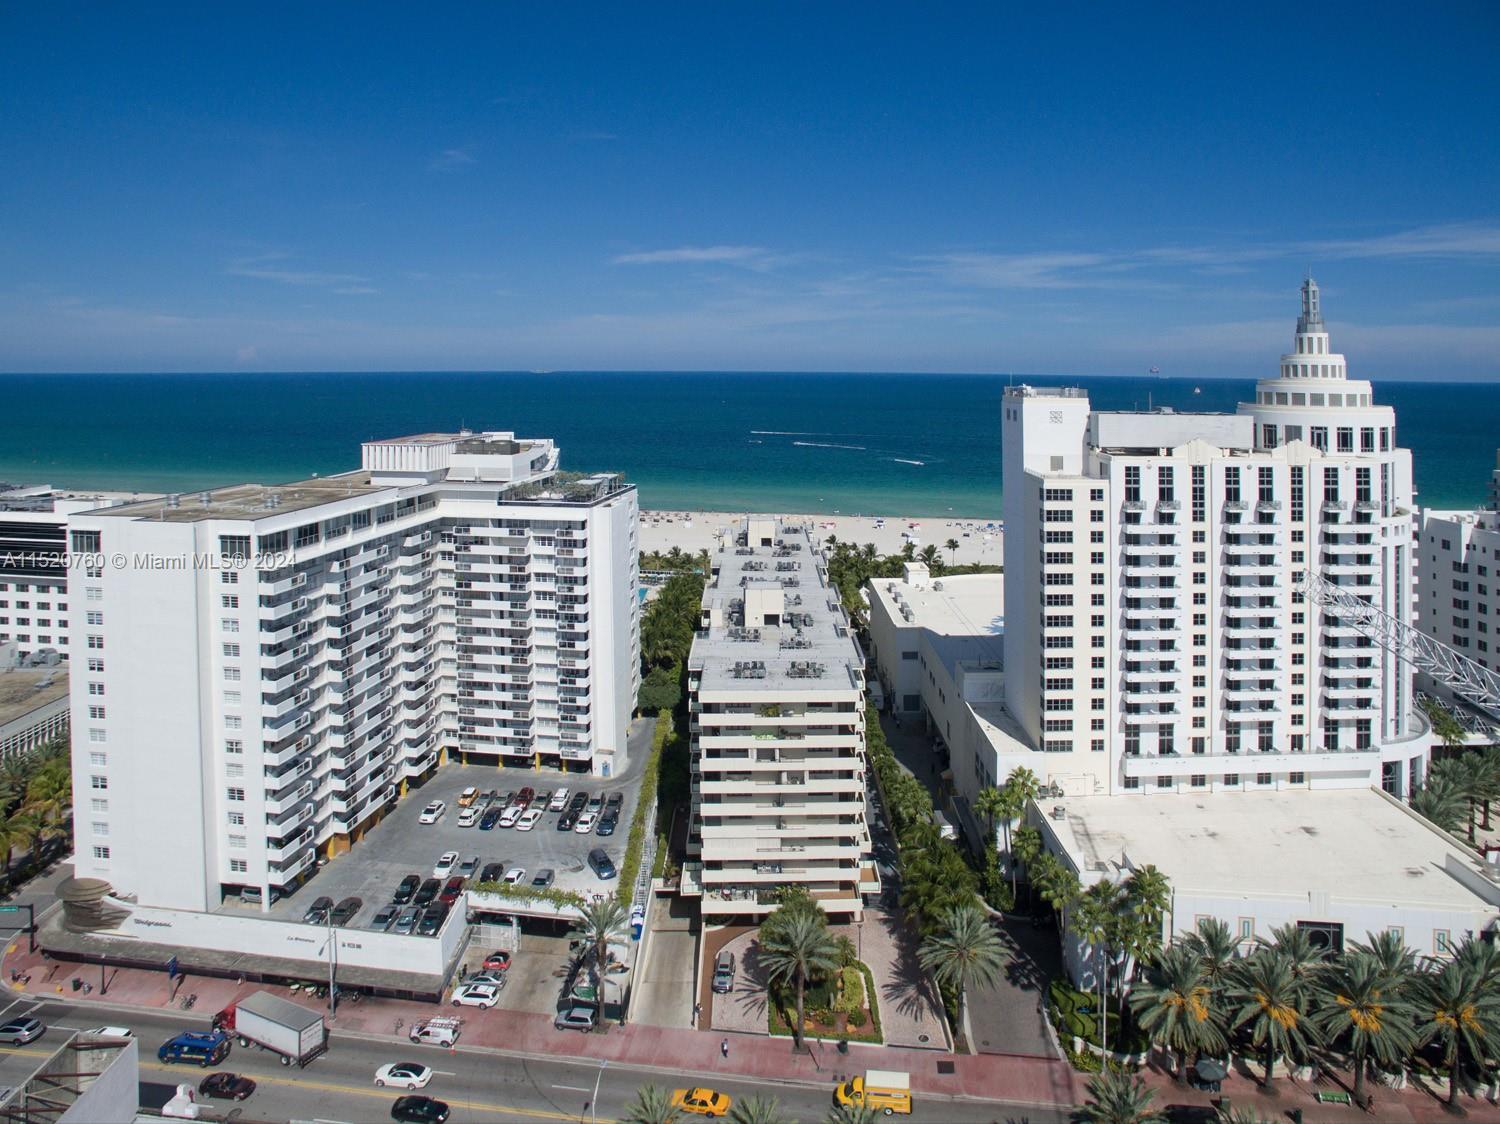 REDUCED! Motivated Seller! Location! The Georgian, a Boutique Condo, oceanside, South Beach. On Beac